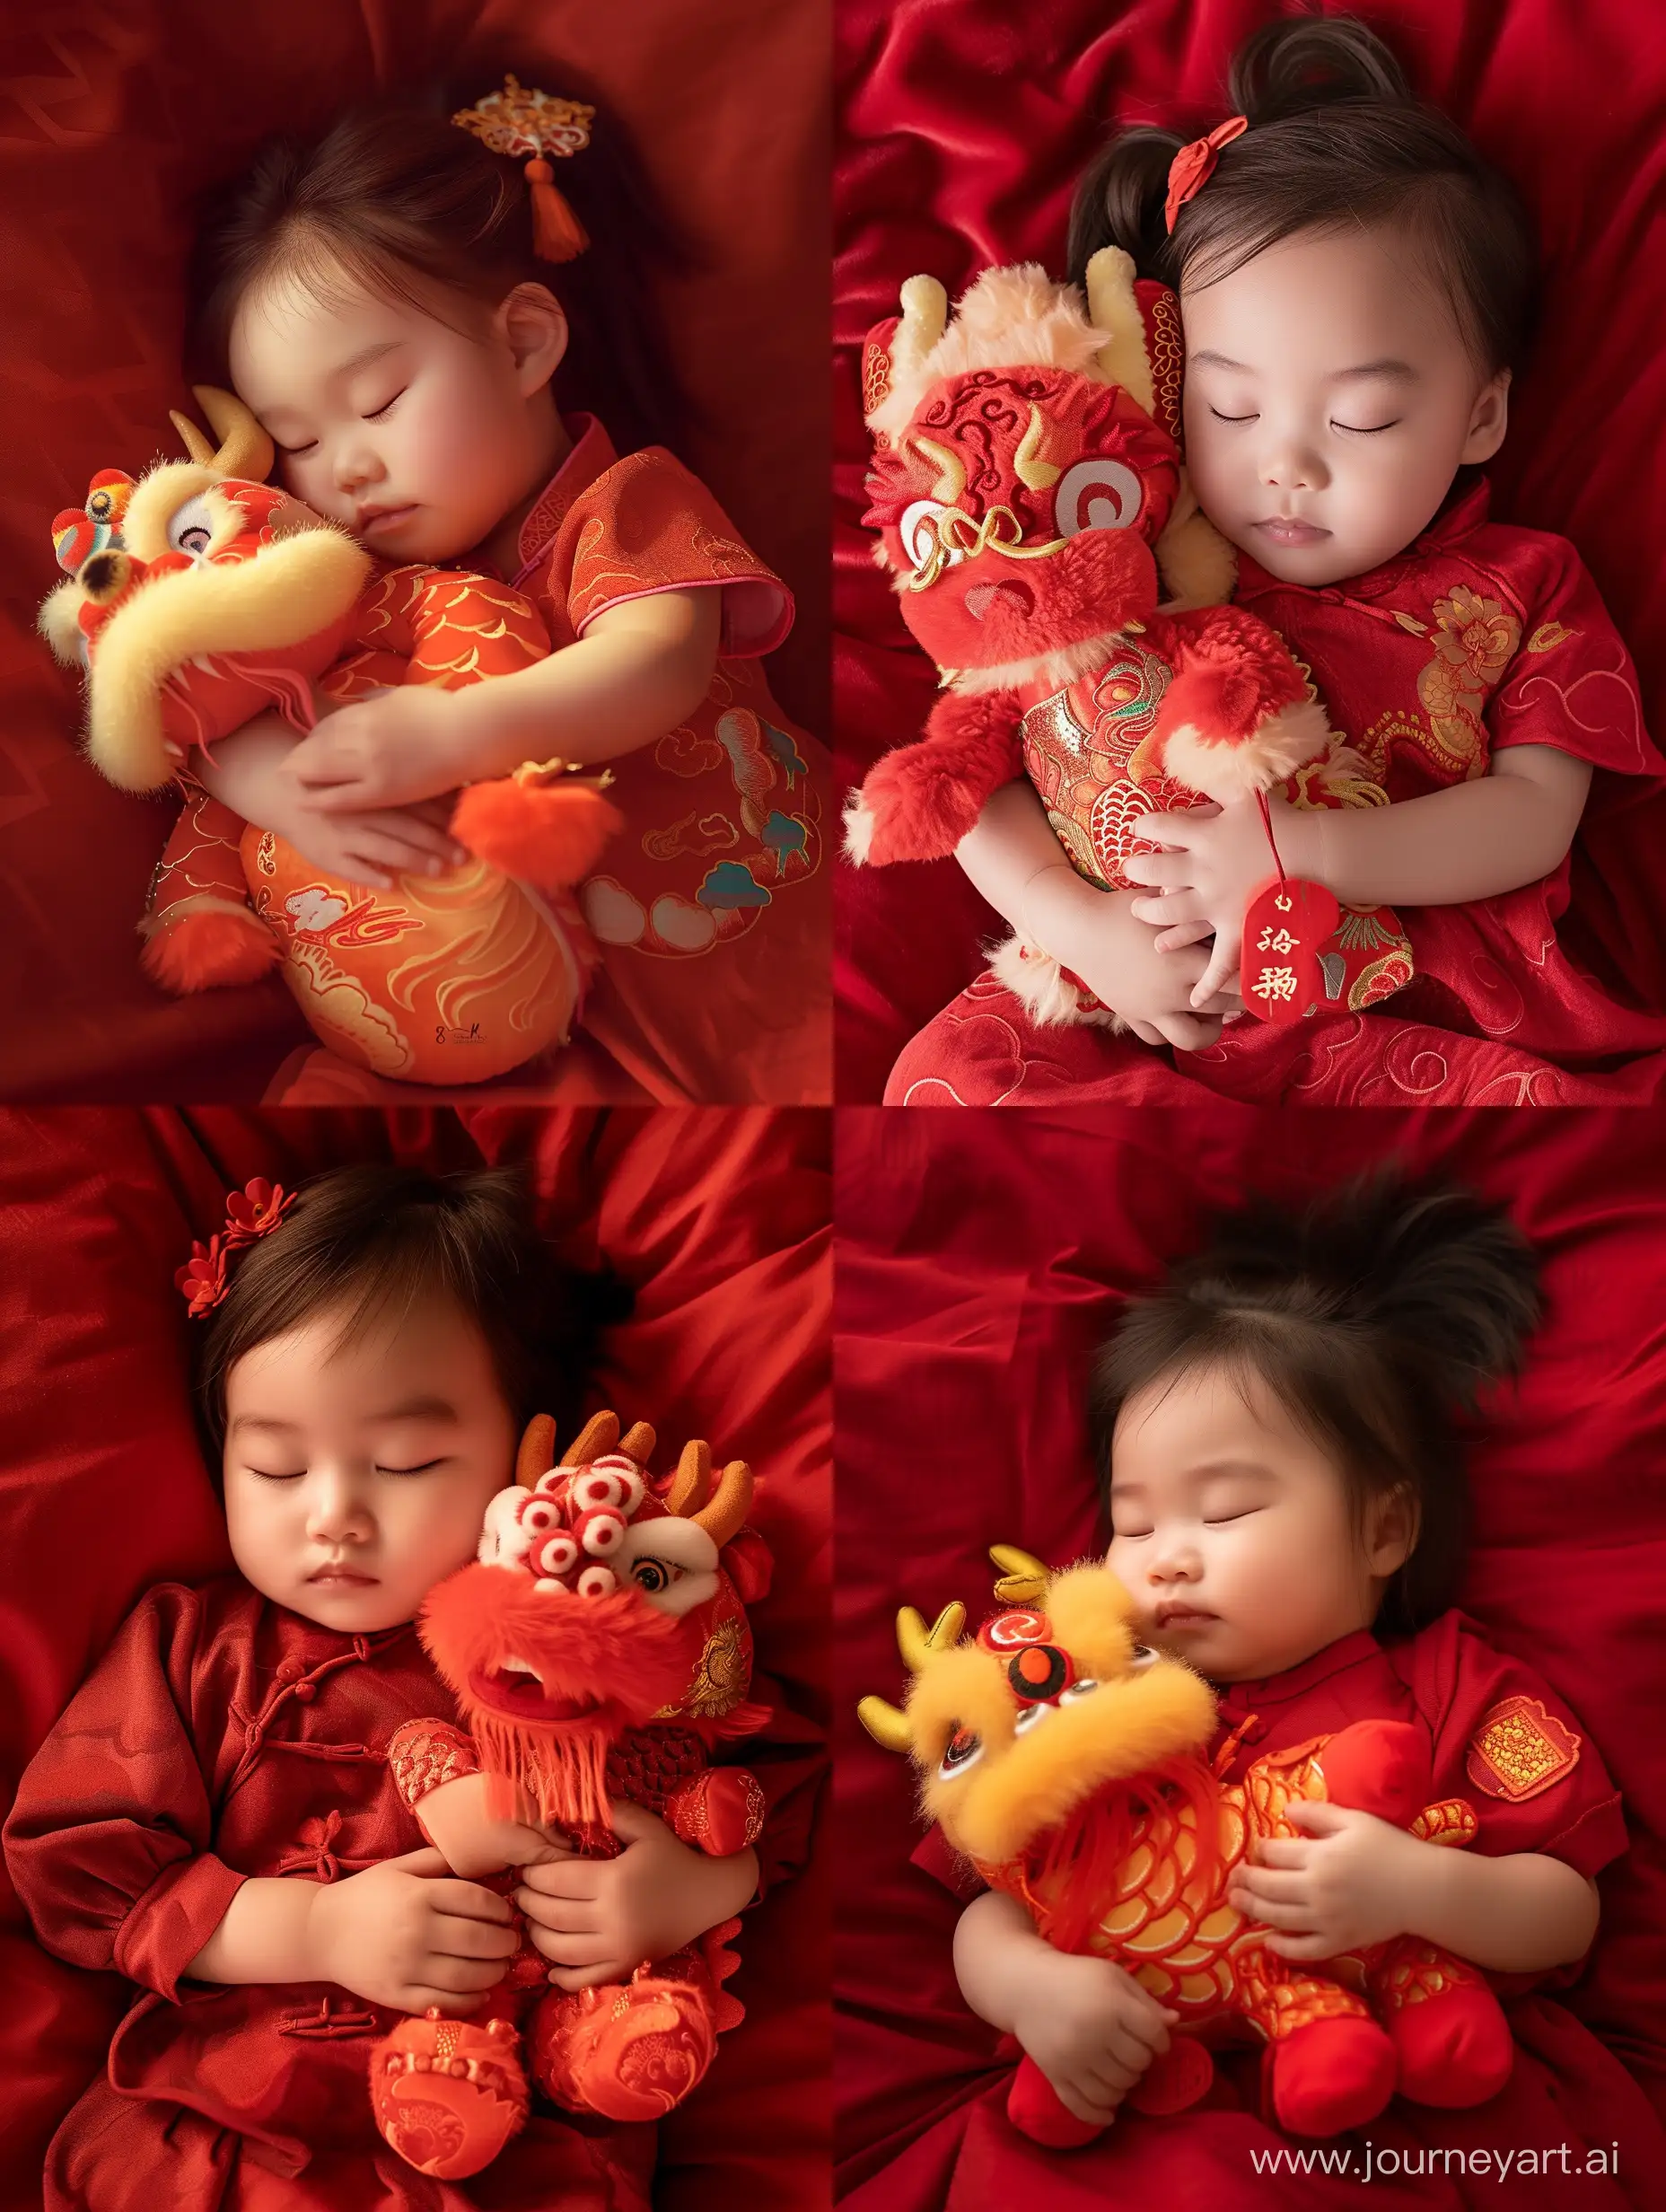 A 1-year-old baby peacefully sleeping, cradling a Chinese dragon plushie. The adorable Chinese girl and the charming dragon depict a harmonious bond, radiating warmth and affection. The vibrant red color scheme adds a touch of traditional elegance, while the artistic portrayal with a fluffy texture enhances the visual appeal. This enchanting scene is beautifully presented in a cartoon-inspired aesthetic, ensuring 8K HDR best quality.